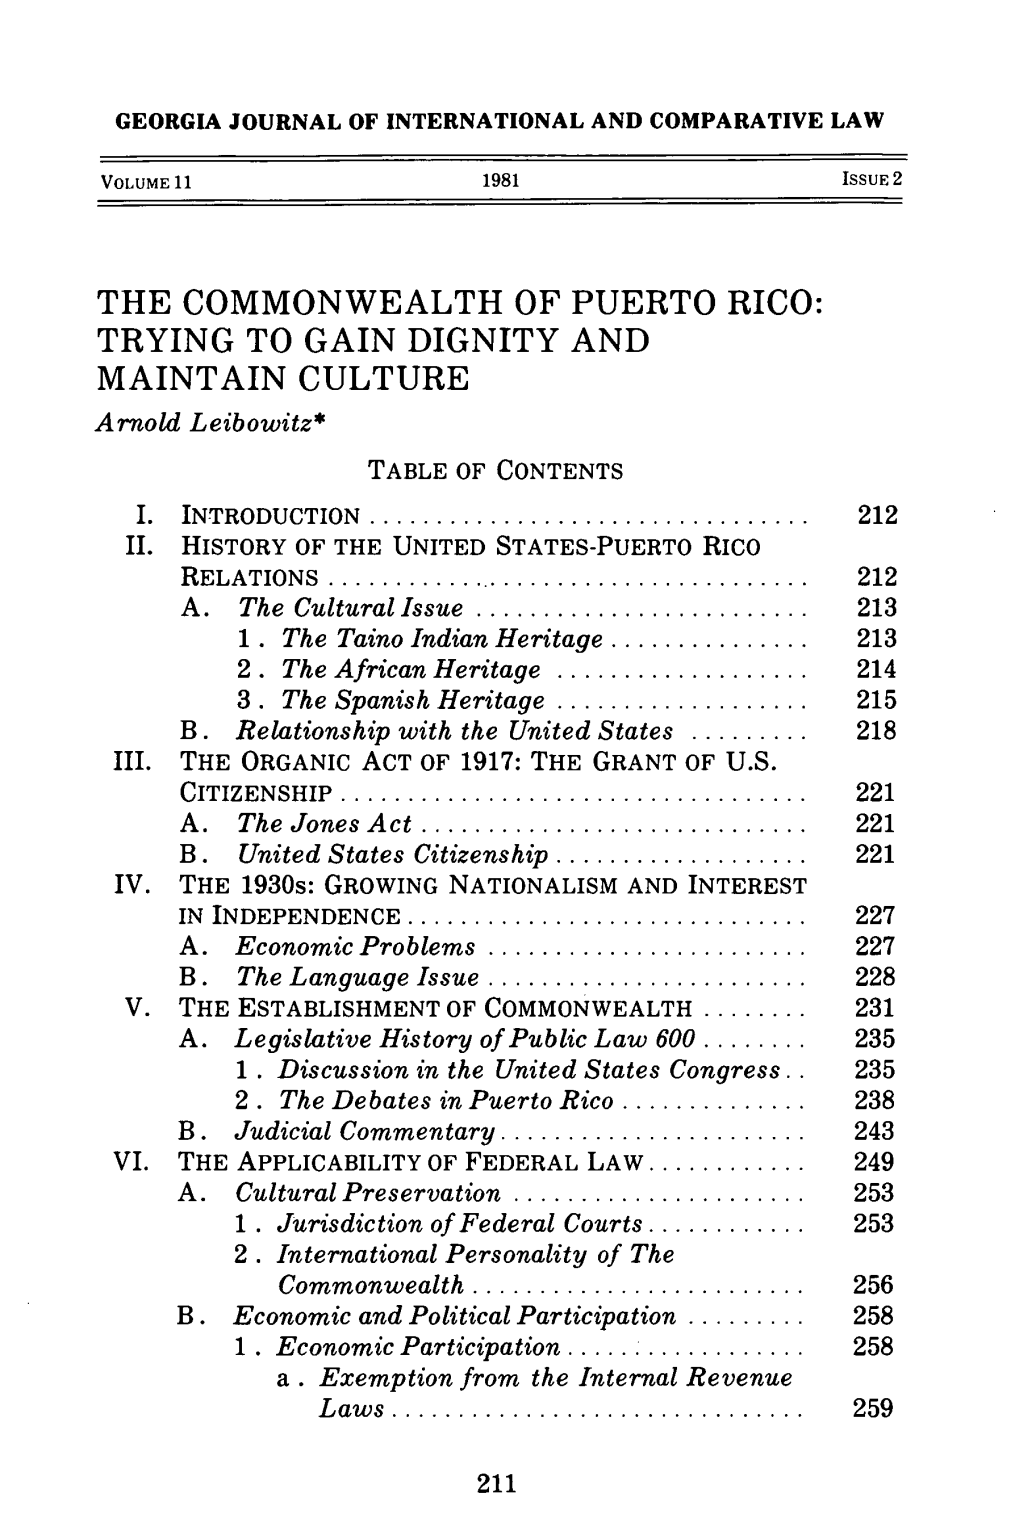 COMMONWEALTH of PUERTO RICO: TRYING to GAIN DIGNITY and MAINTAIN CULTURE Arnold Leibowitz*